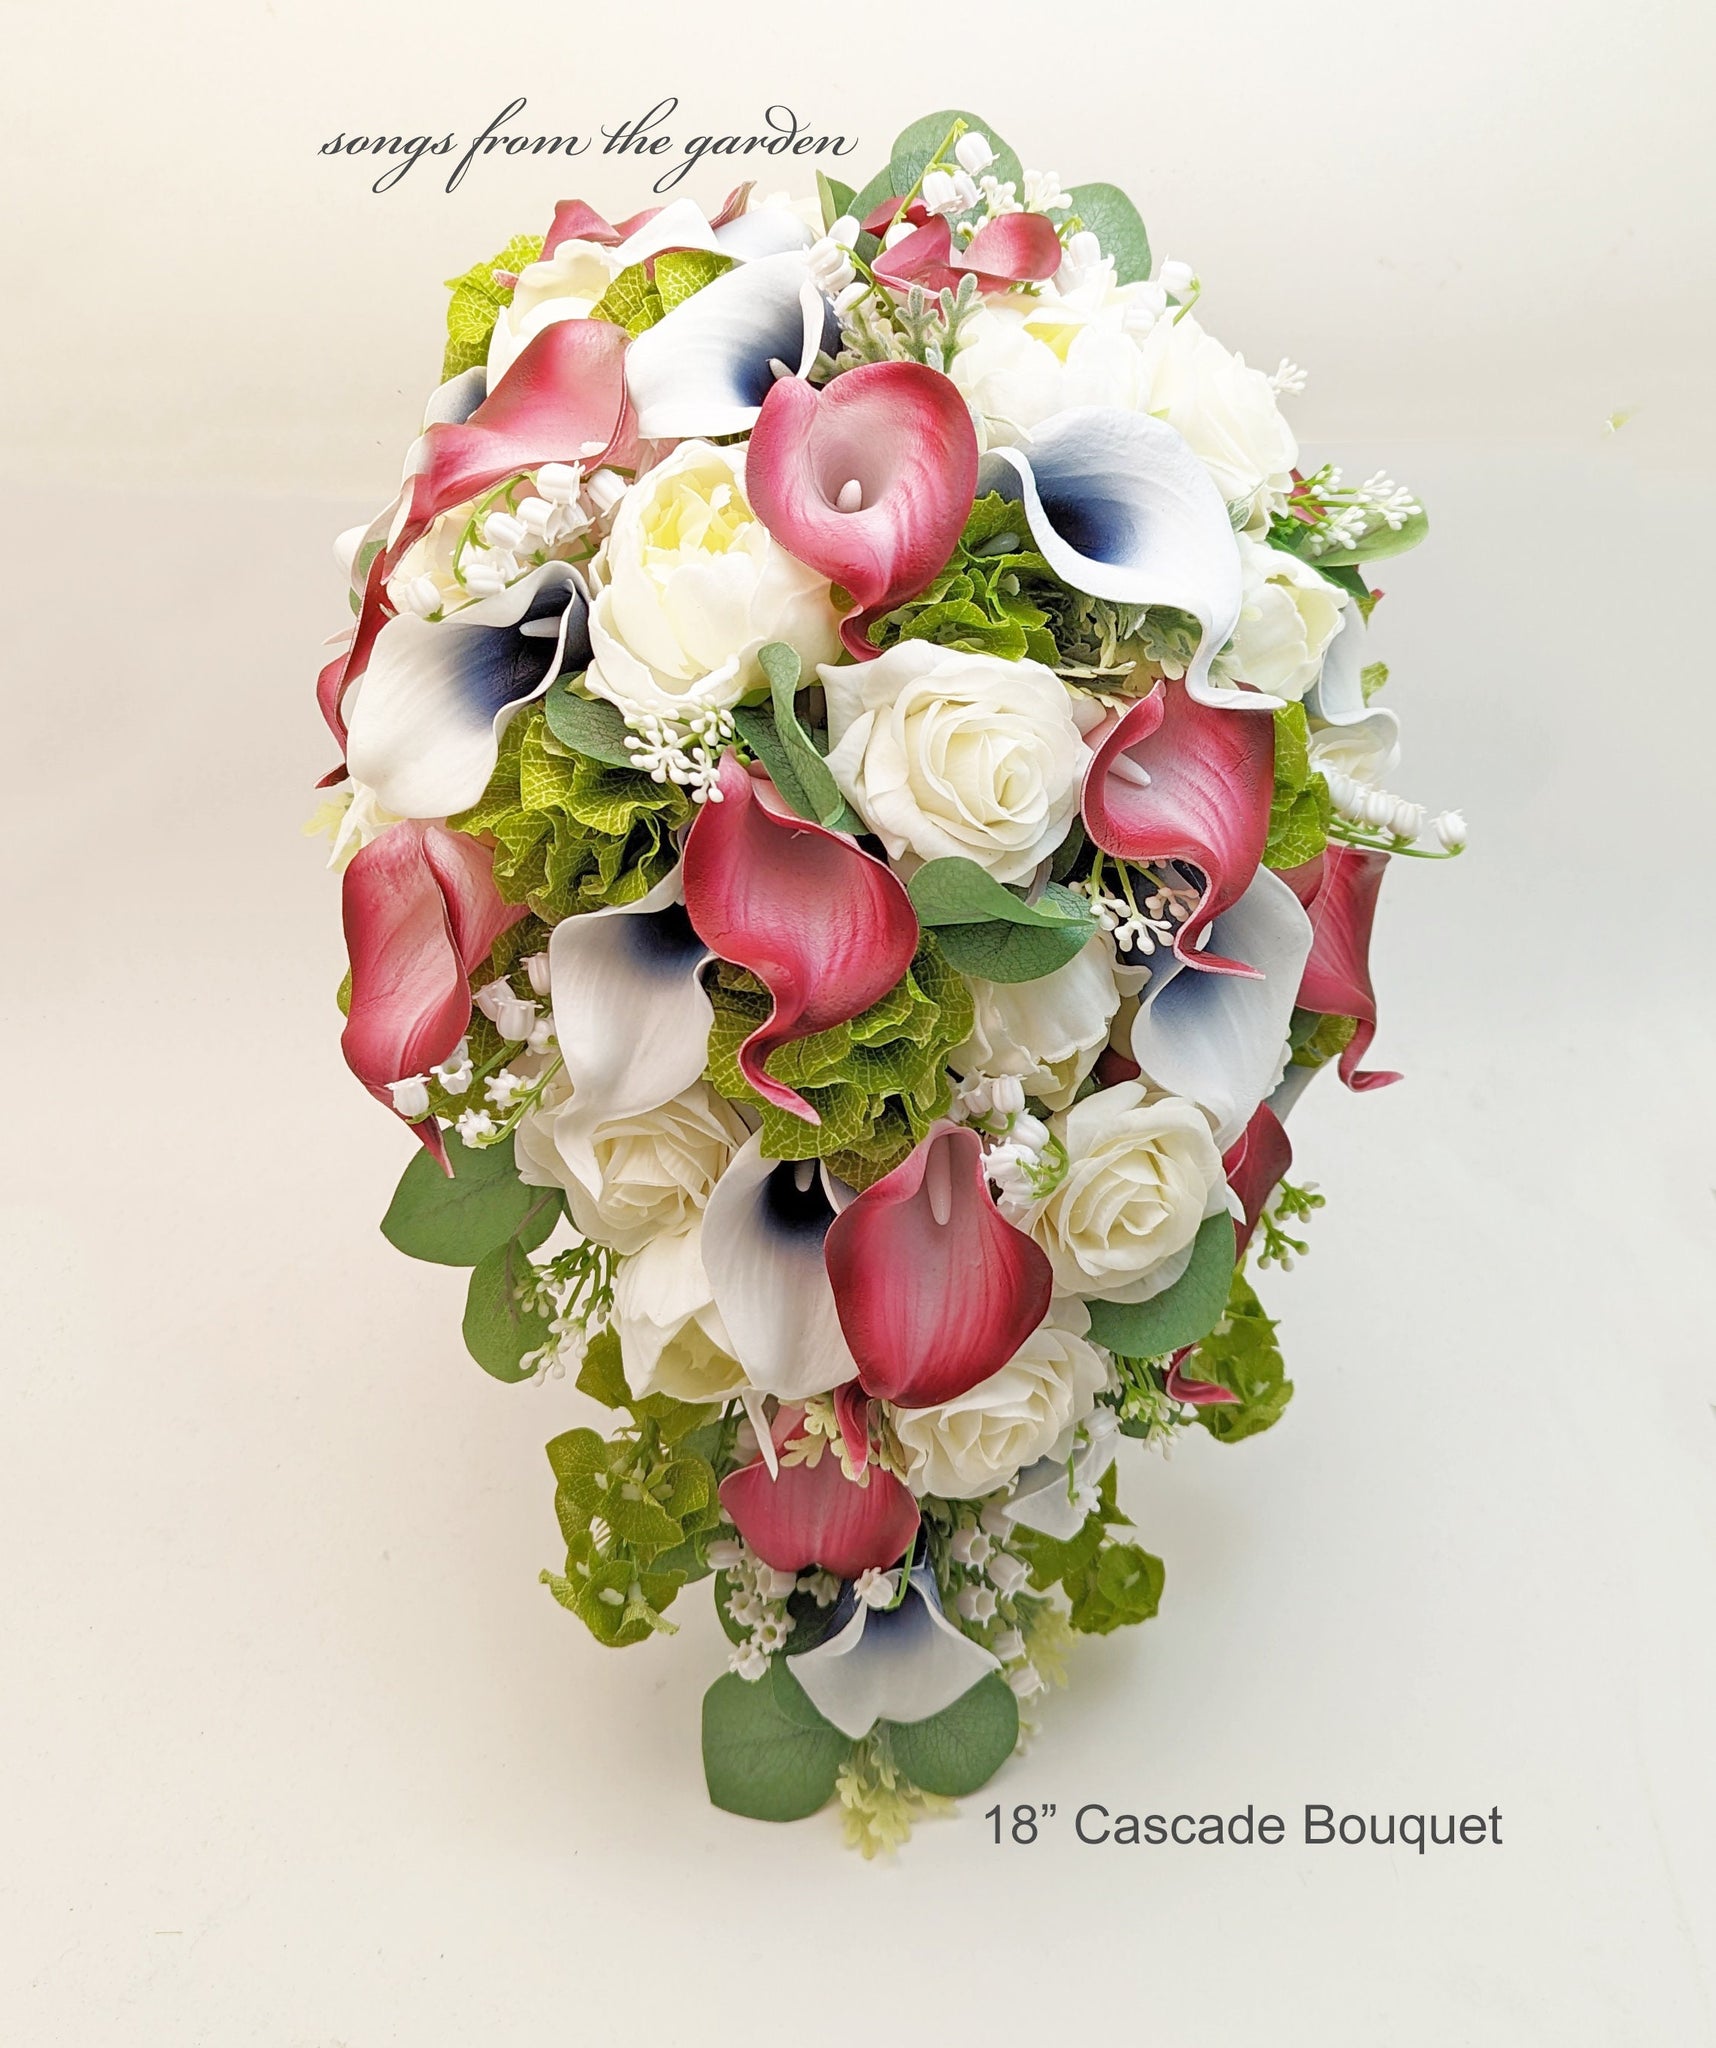 Cascade Bridal Bouquet Wine Navy Roses Callas Eucalyptus Greenery - Add Boutonniere Corsage Bridesmaid Bouquet Flower Crown Arch & More!